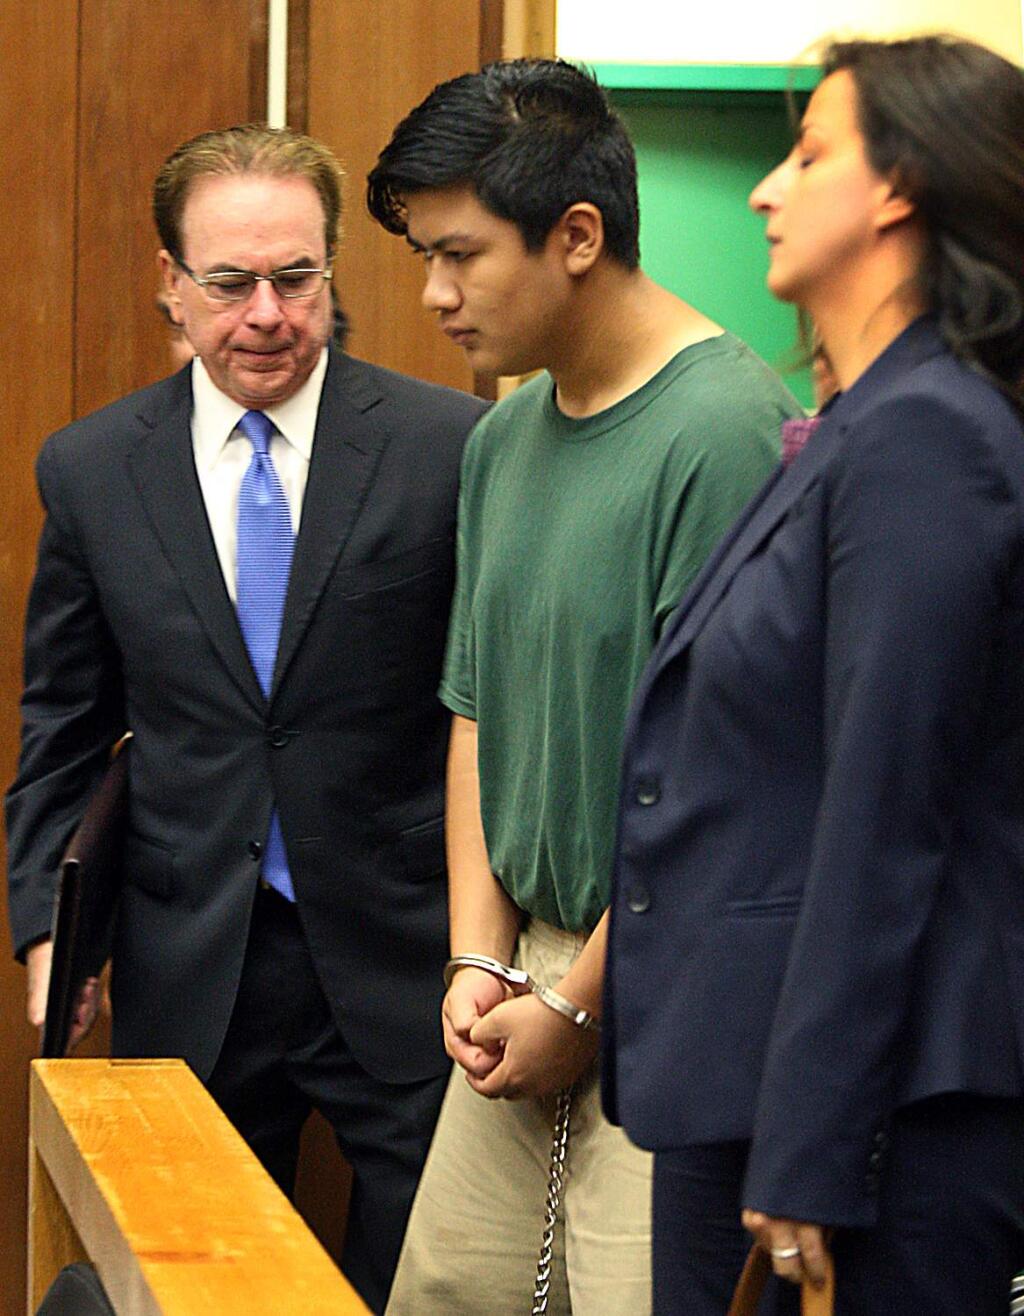 Adrian Jerry Gonzalez, center, is flanked by public defender Larry Biggam and attorney Leila Sayar as they enter the courtroom Thursday, July 30, 2015 where his arraignment was delayed in Santa Cruz, Calif. Gonzalez charged with murder, kidnapping and rape in the death of 8-year-old Madyson Middleton, in an artists' complex in the California beach town. (Dan Coyro/Santa Cruz Sentinel via AP) MANDATORY CREDIT